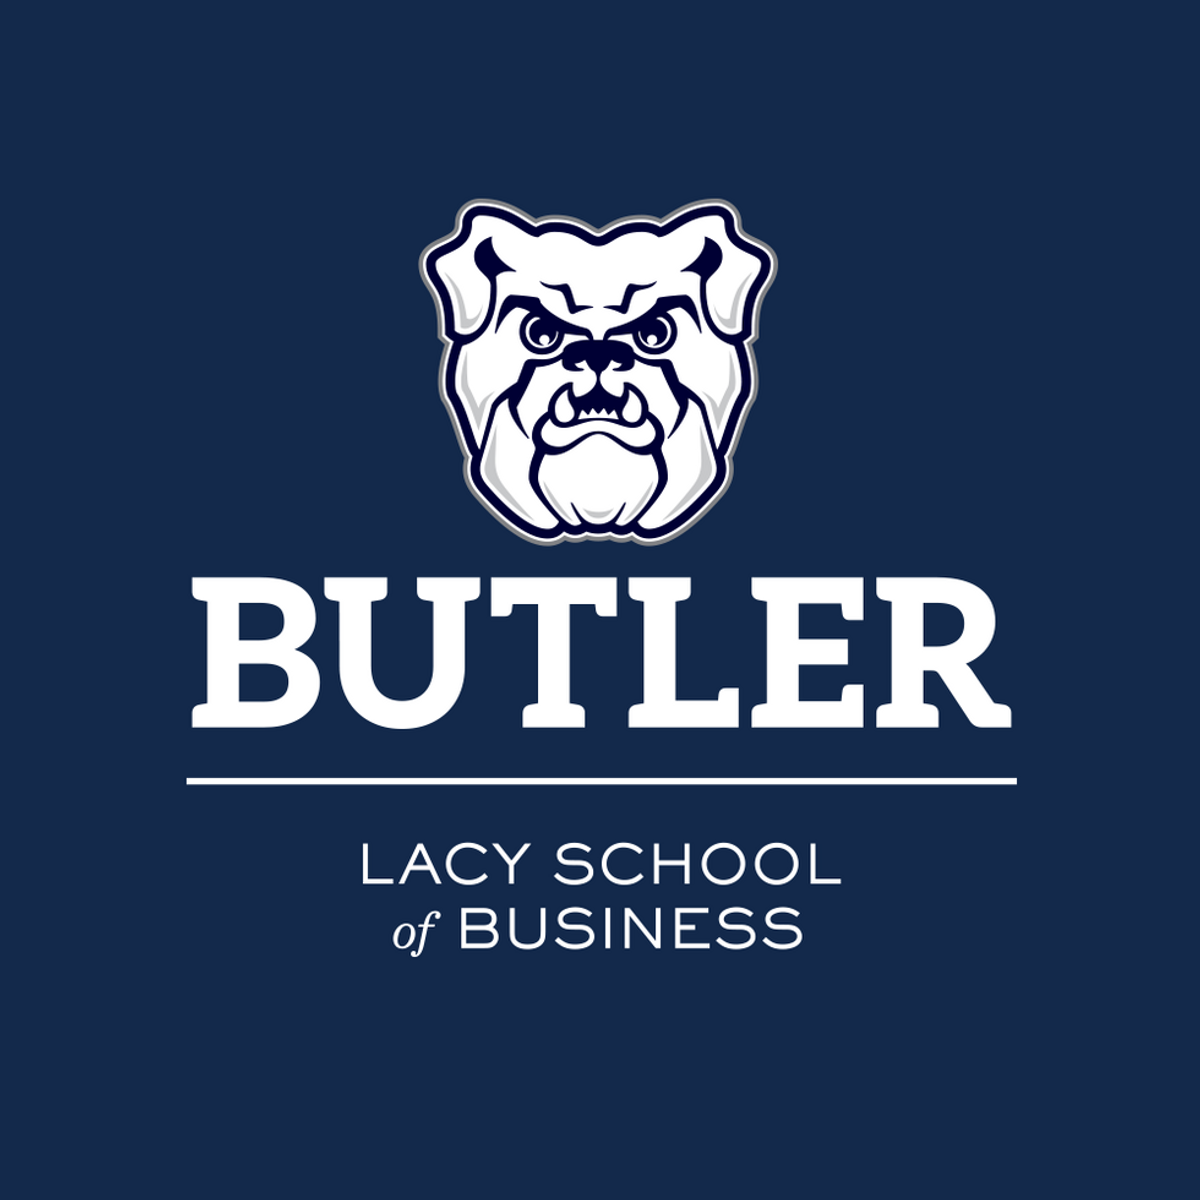 The New Andre B. Lacy School Of Business